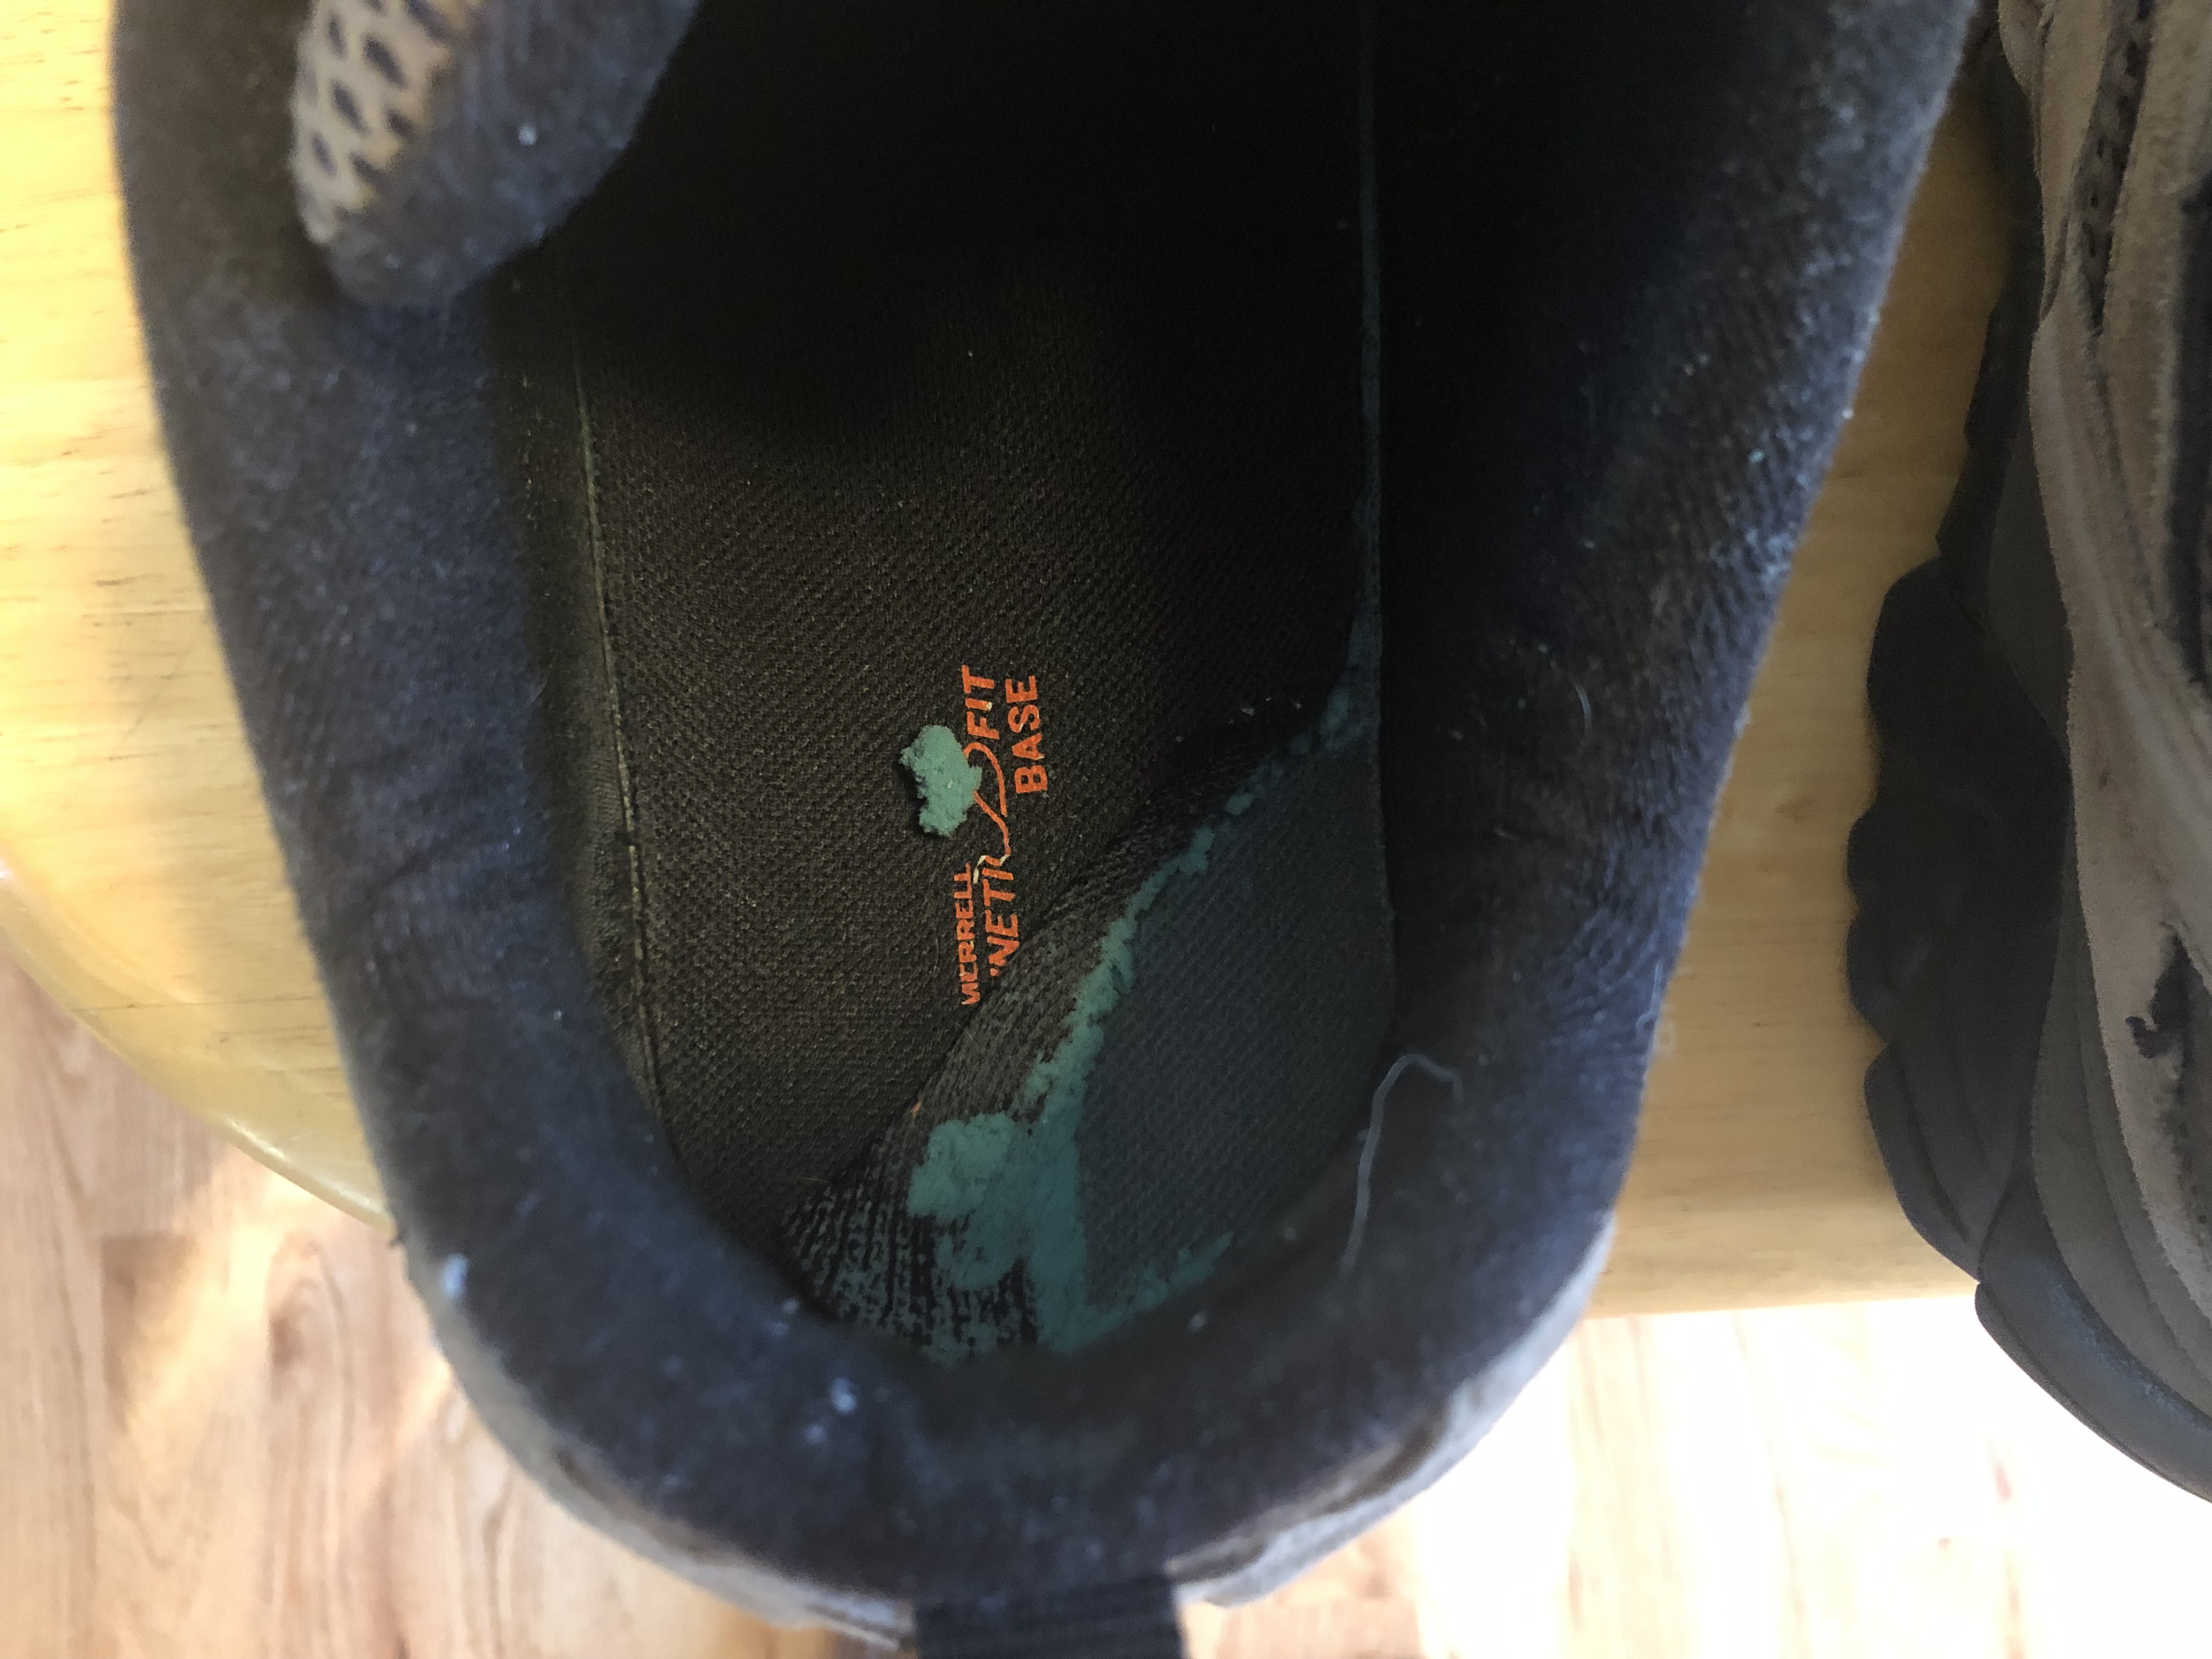 merrell replacement insoles